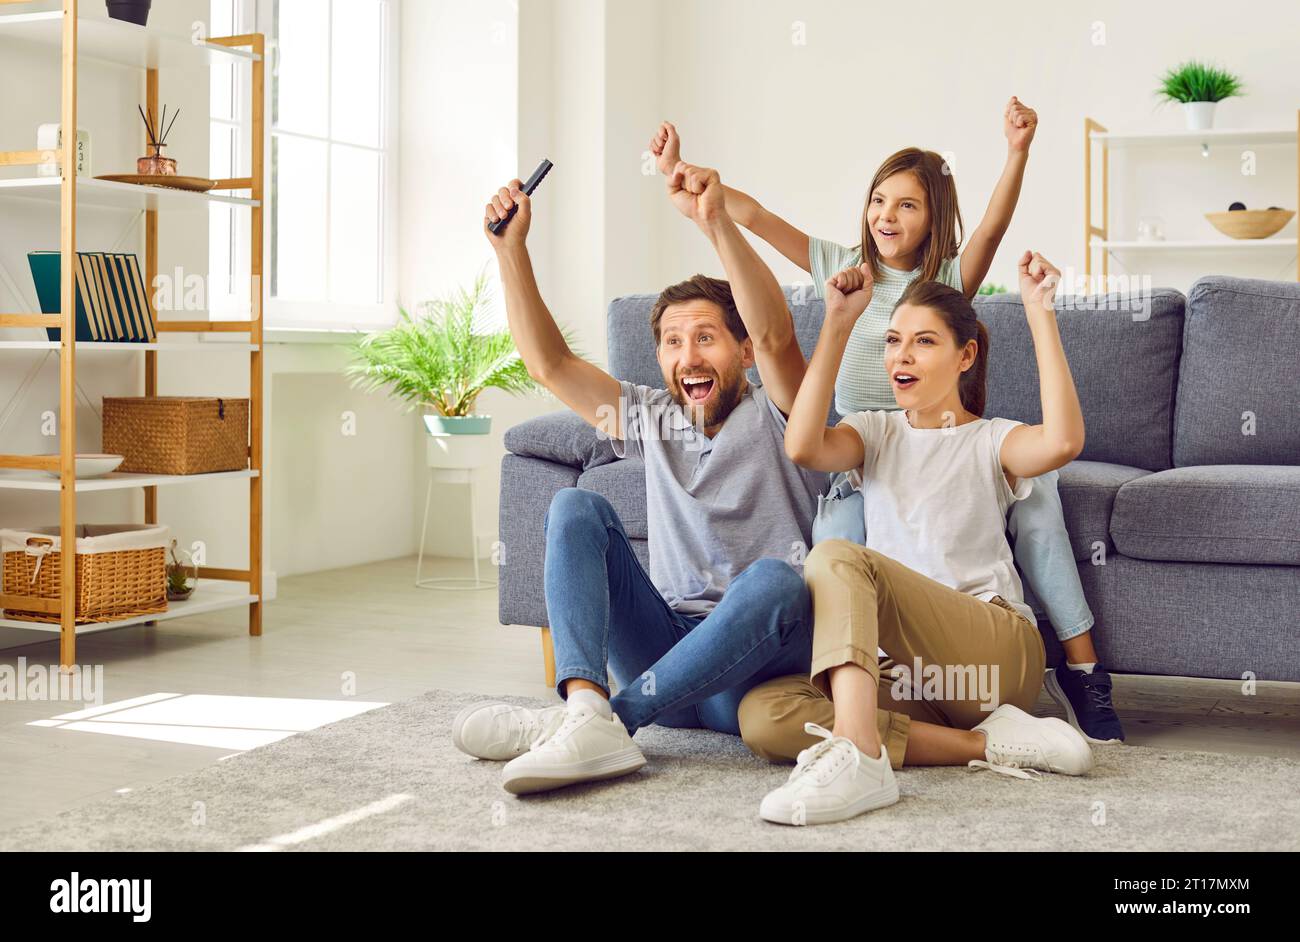 Happy mom, dad and child watching football match on TV, celebrating goal and cheering Stock Photo